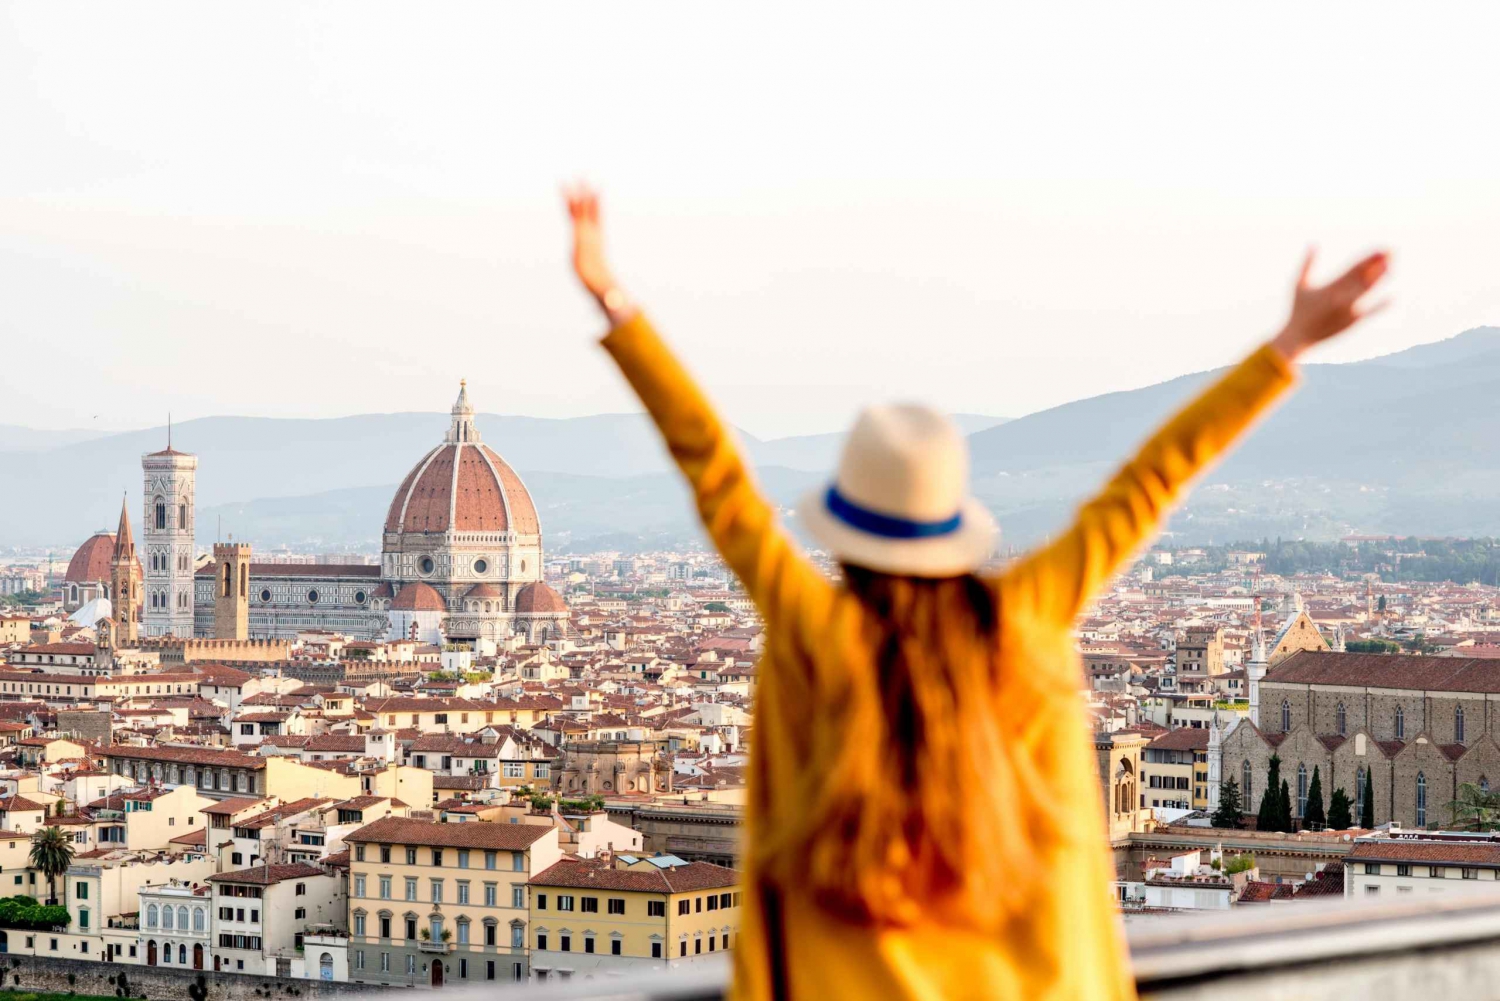 From Bologna: Florence Guided Walking Tour with Train Ticket